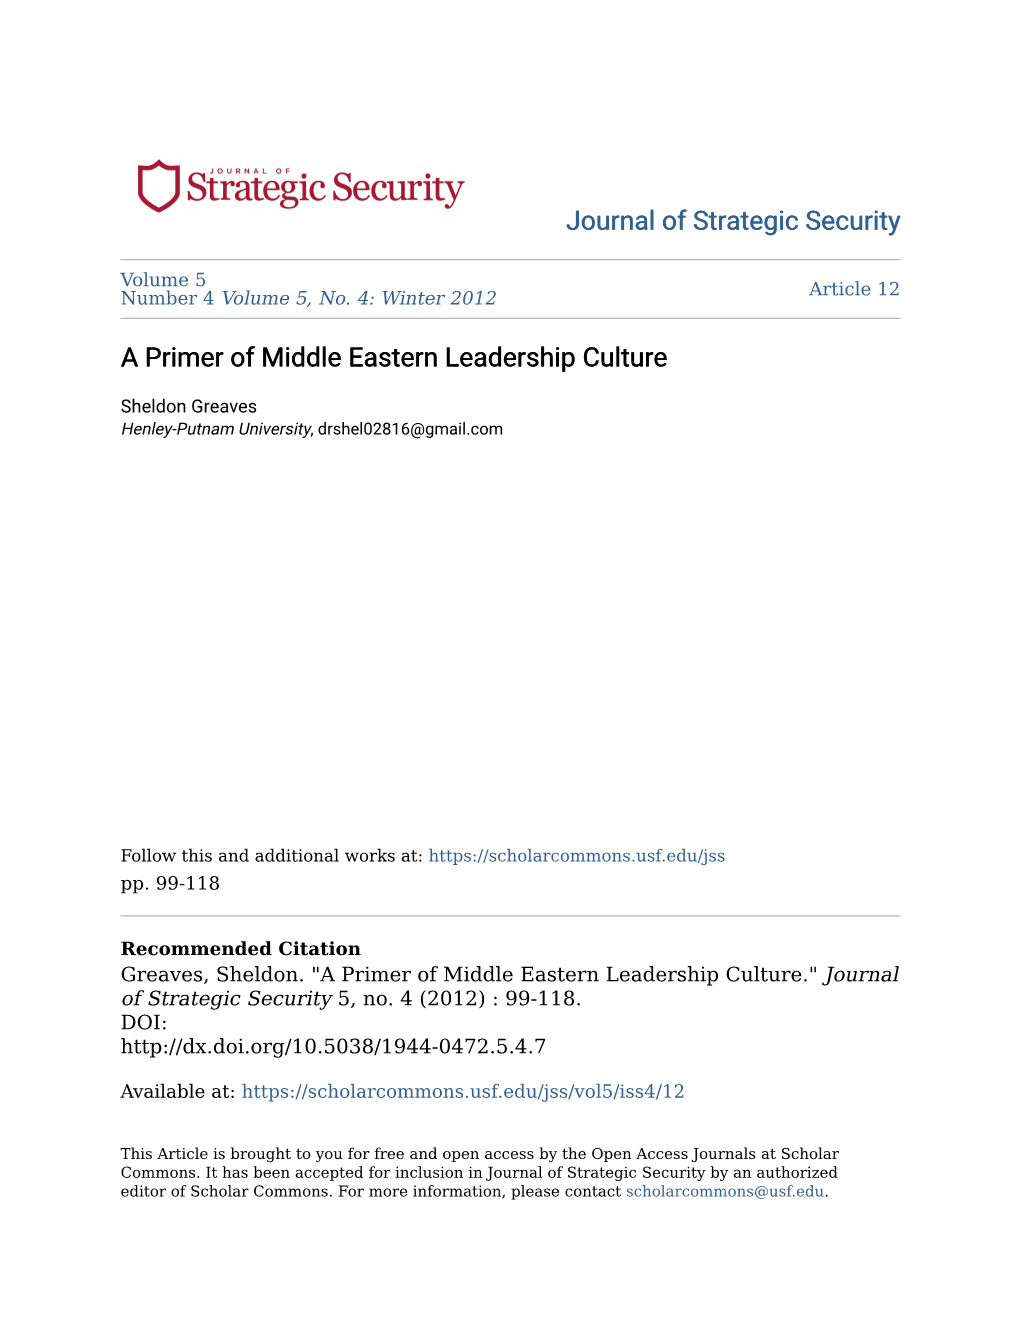 A Primer of Middle Eastern Leadership Culture